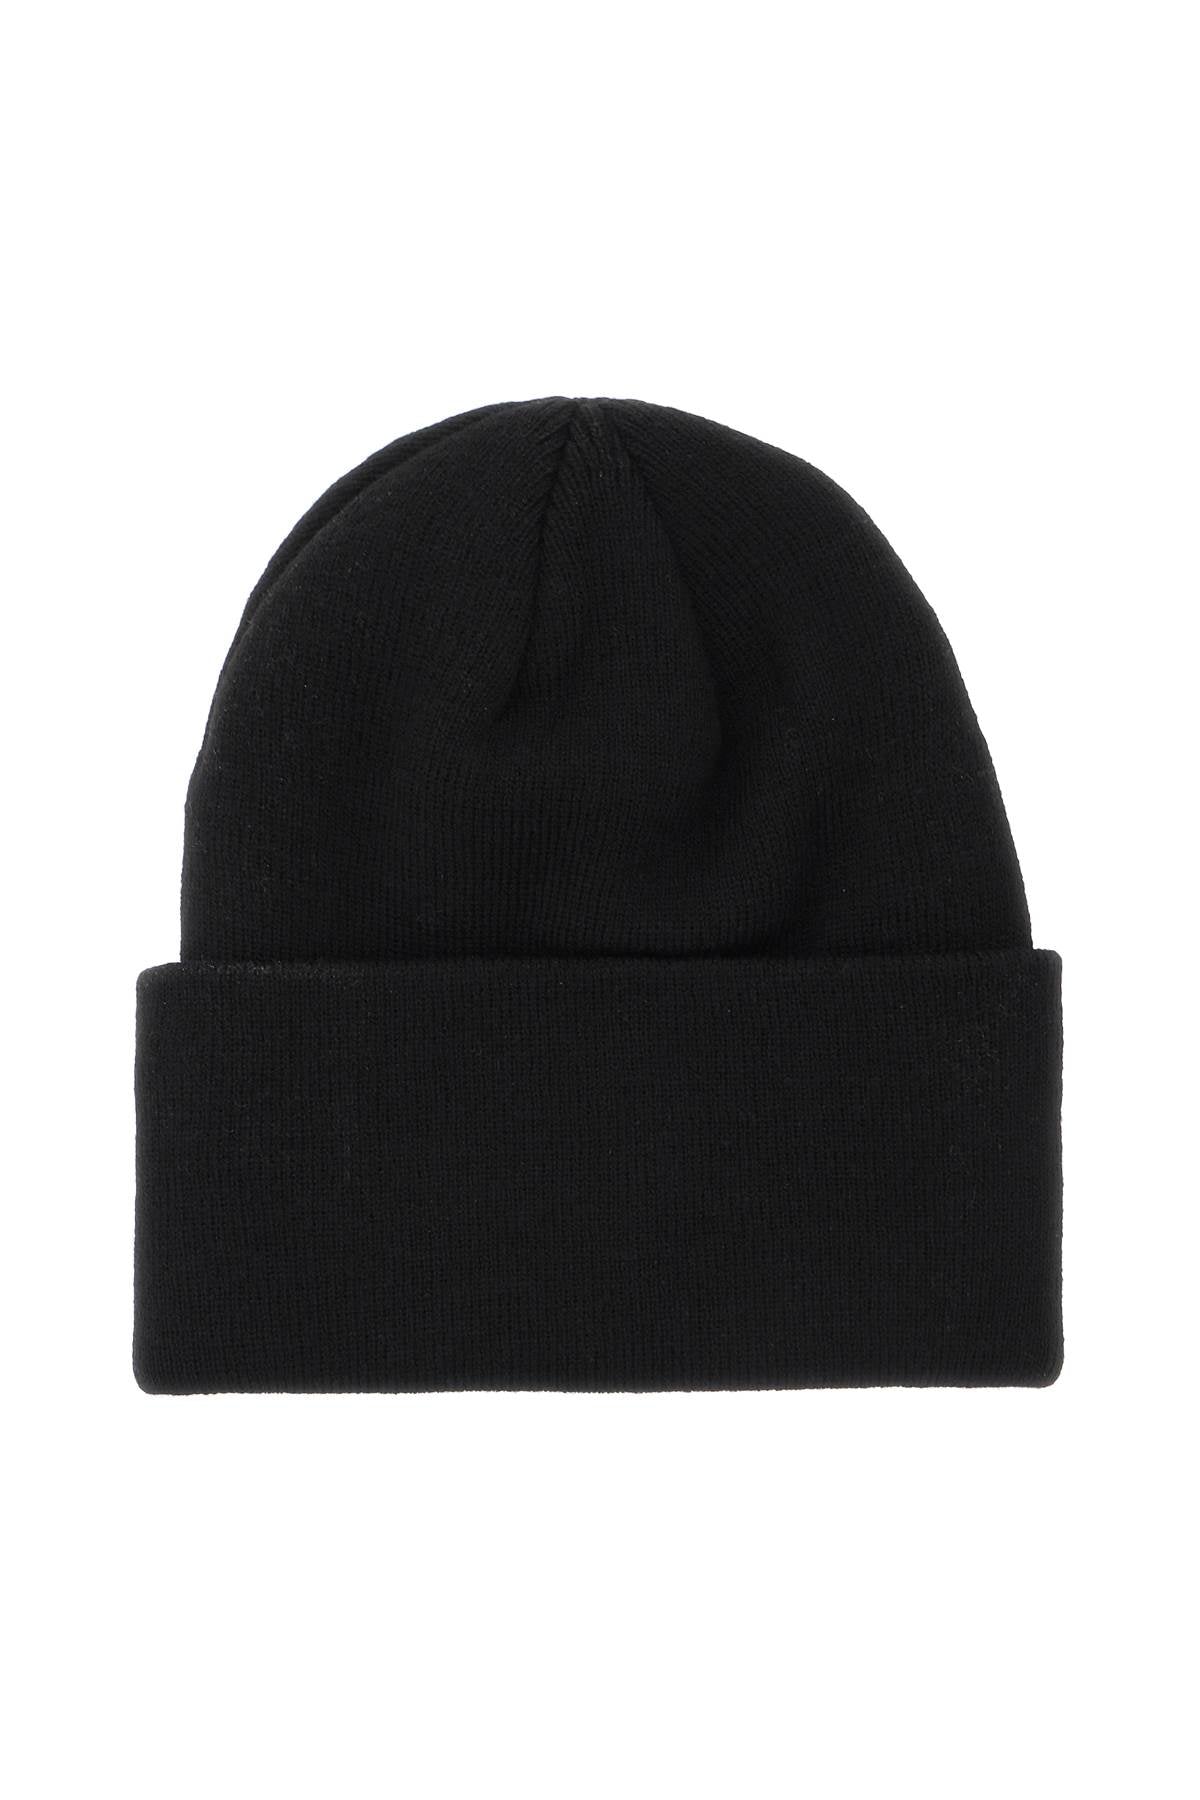 Rotate beanie hat with logo patch-women > accessories > scarves and gloves-Rotate-os-Black-Urbanheer